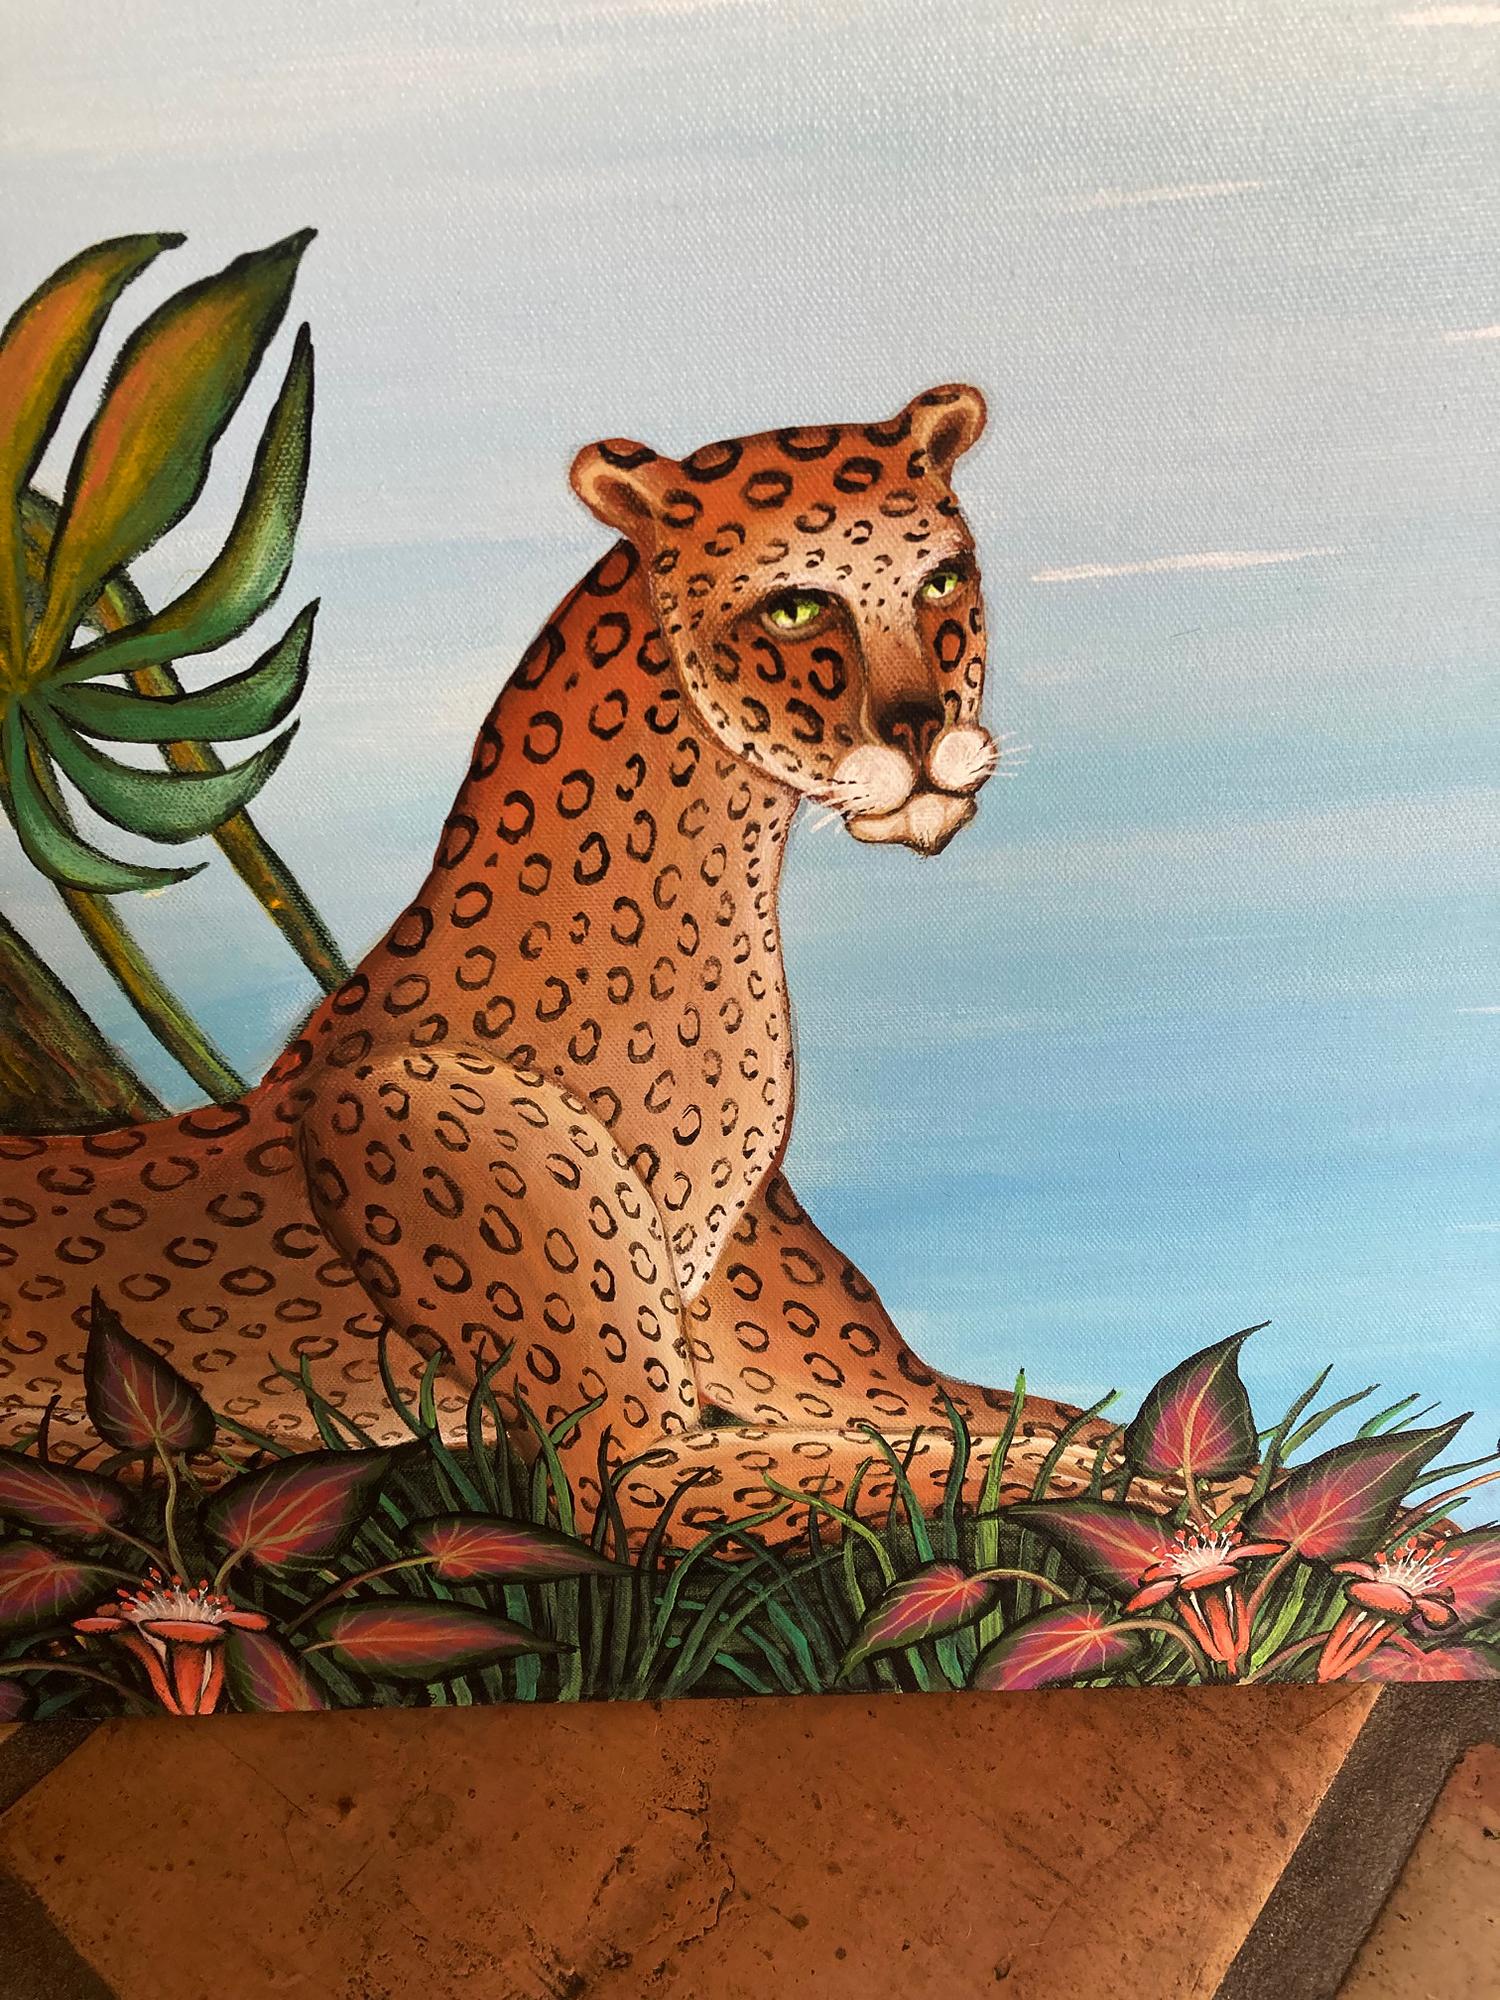 Silent Paradise - Leopards, Zebras, Panther and Hippo  - Painting by Gustavo Novoa